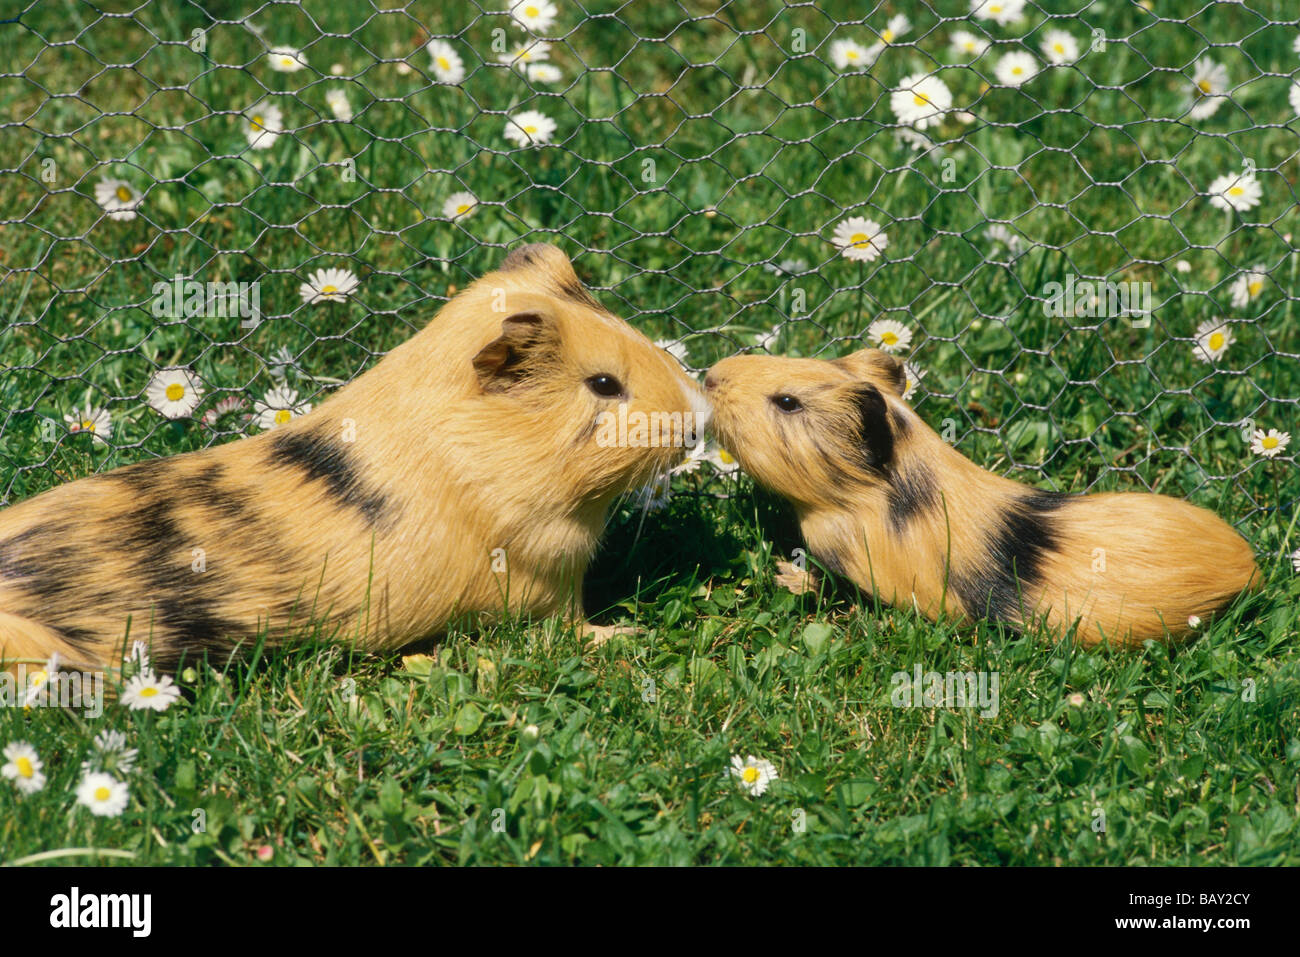 Guinea pigs, mother and young animal in outdoor enclosure on a meadow Stock Photo